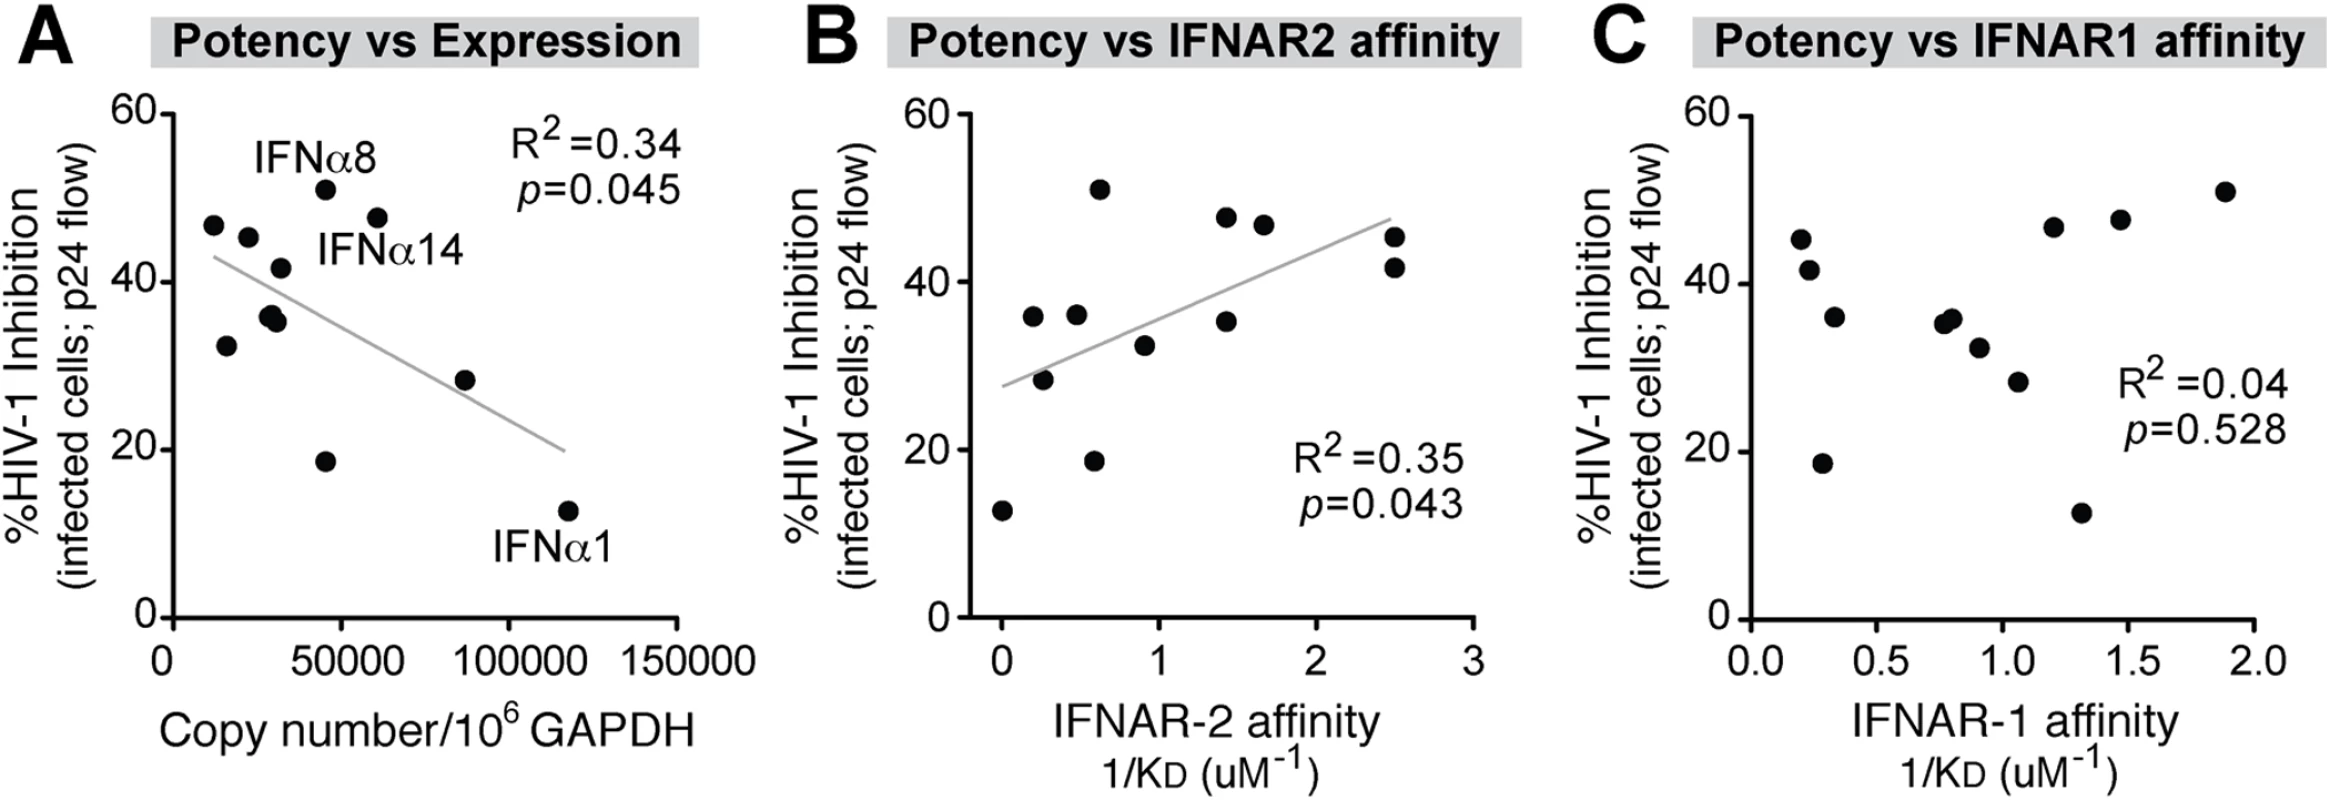 Correlation between IFNα antiviral potency and various parameters.